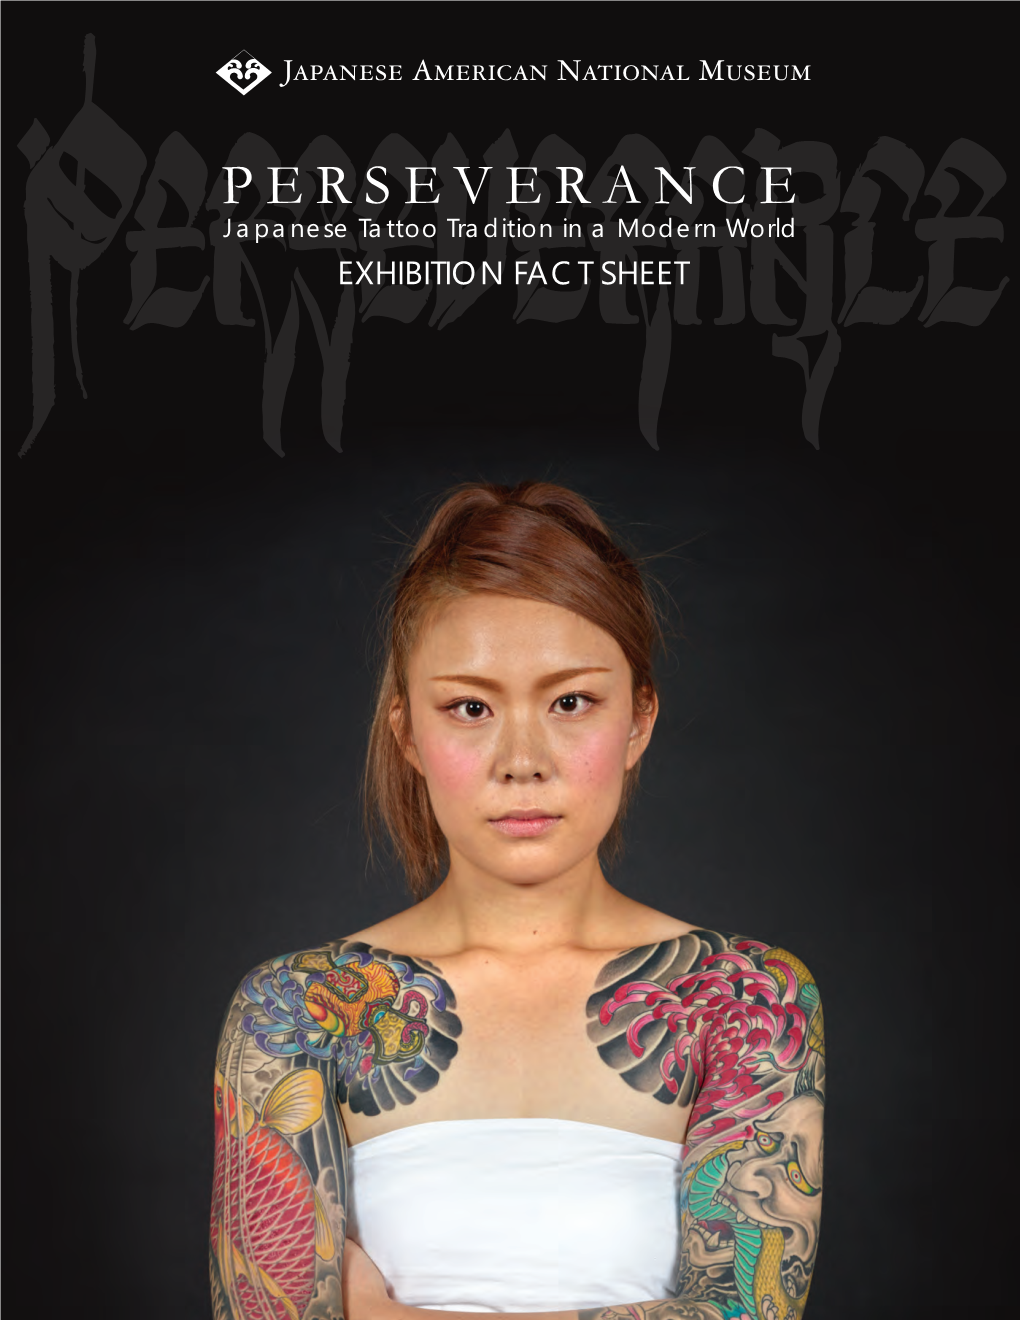 Perseverance: Japanese Tattoo Tradition in a Modern World, Features 300 Photographs by Kip Fulbeck, a Selection of Which Are Included in the Exhibition